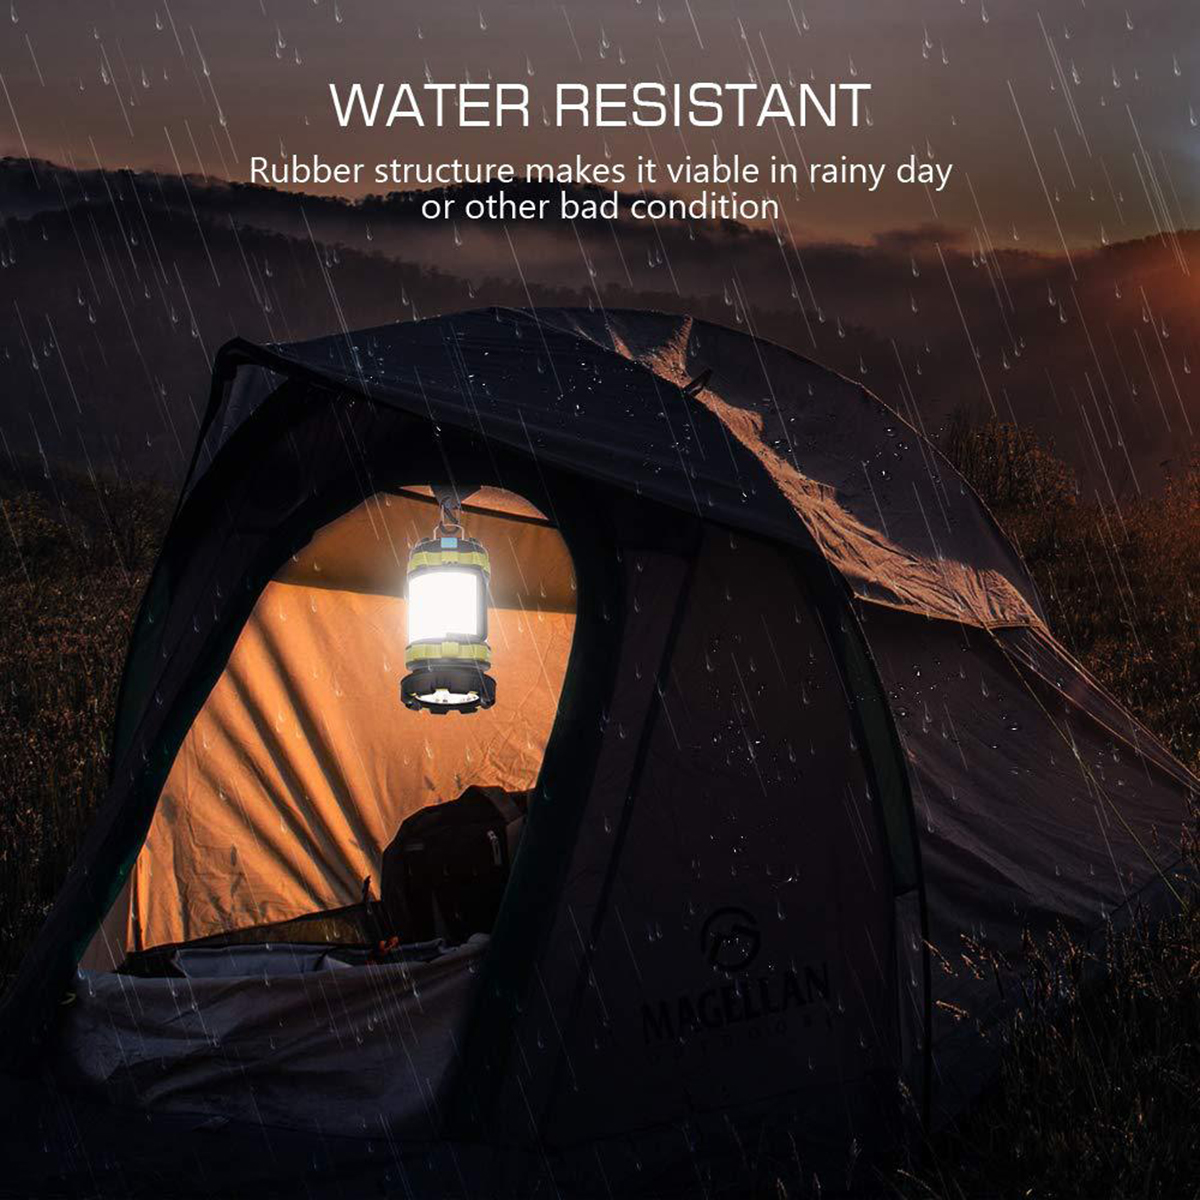 LED-Flashlight-Camping-Light-Torch-Lantern-USB-Rechargeable-USB-Charger-Worklight-Waterproof-1612111-2